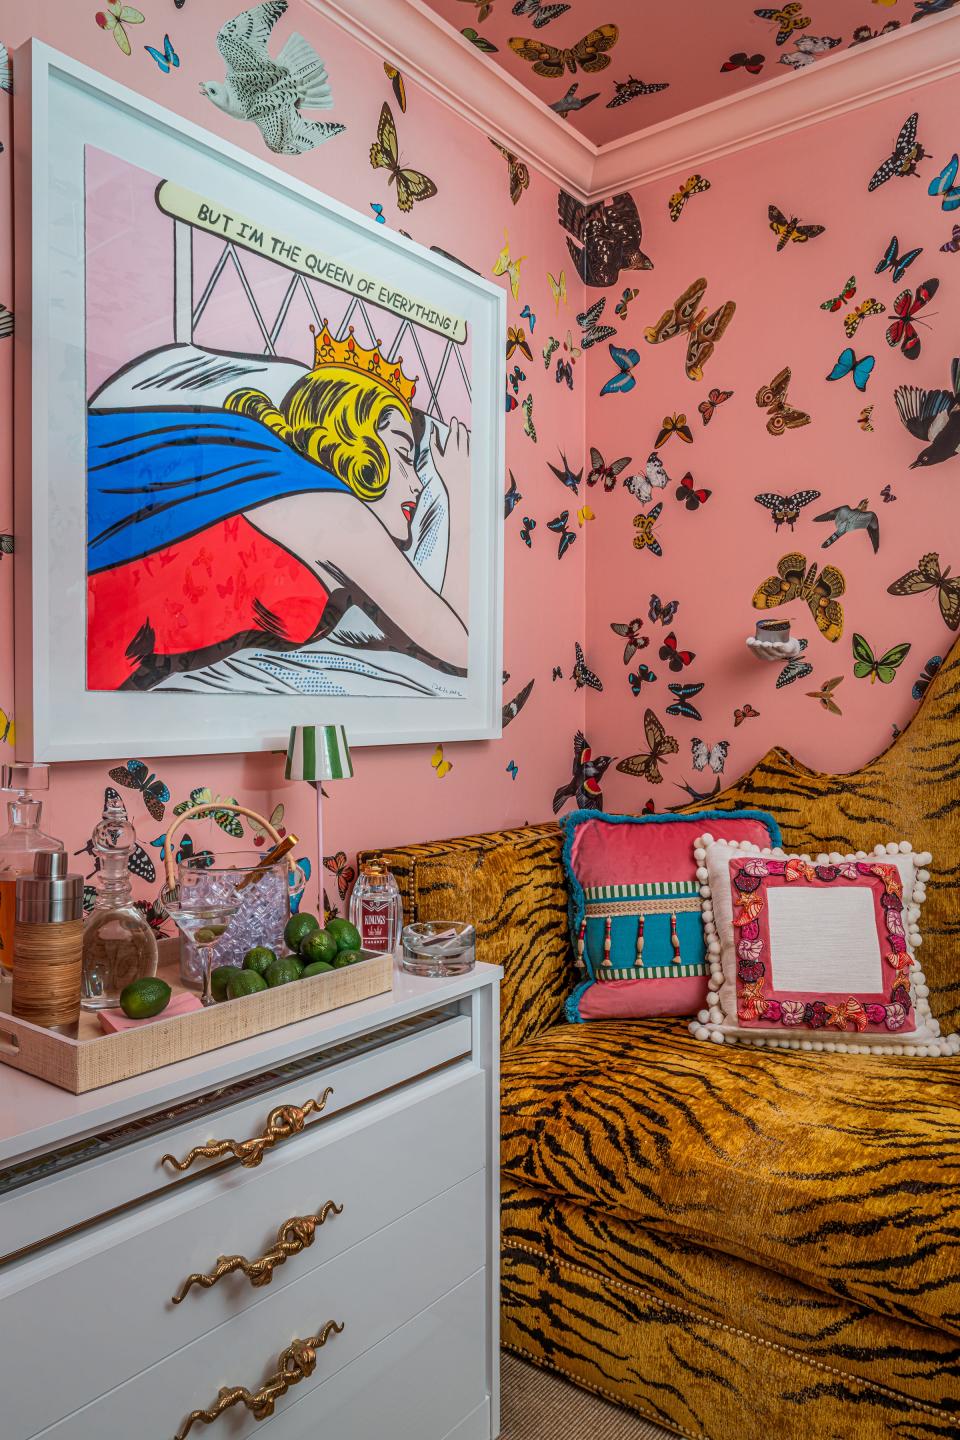 Hanging above a bureau filled with candy and vodka bottles is a piece of art by Nelson De La Nuez titled “But I’m the Queen of Everything!” in designer Megan Gorelick's "Gimme a Minute" retreat for the woman of the house at the Kips Bay Decorator Show House Palm Beach.